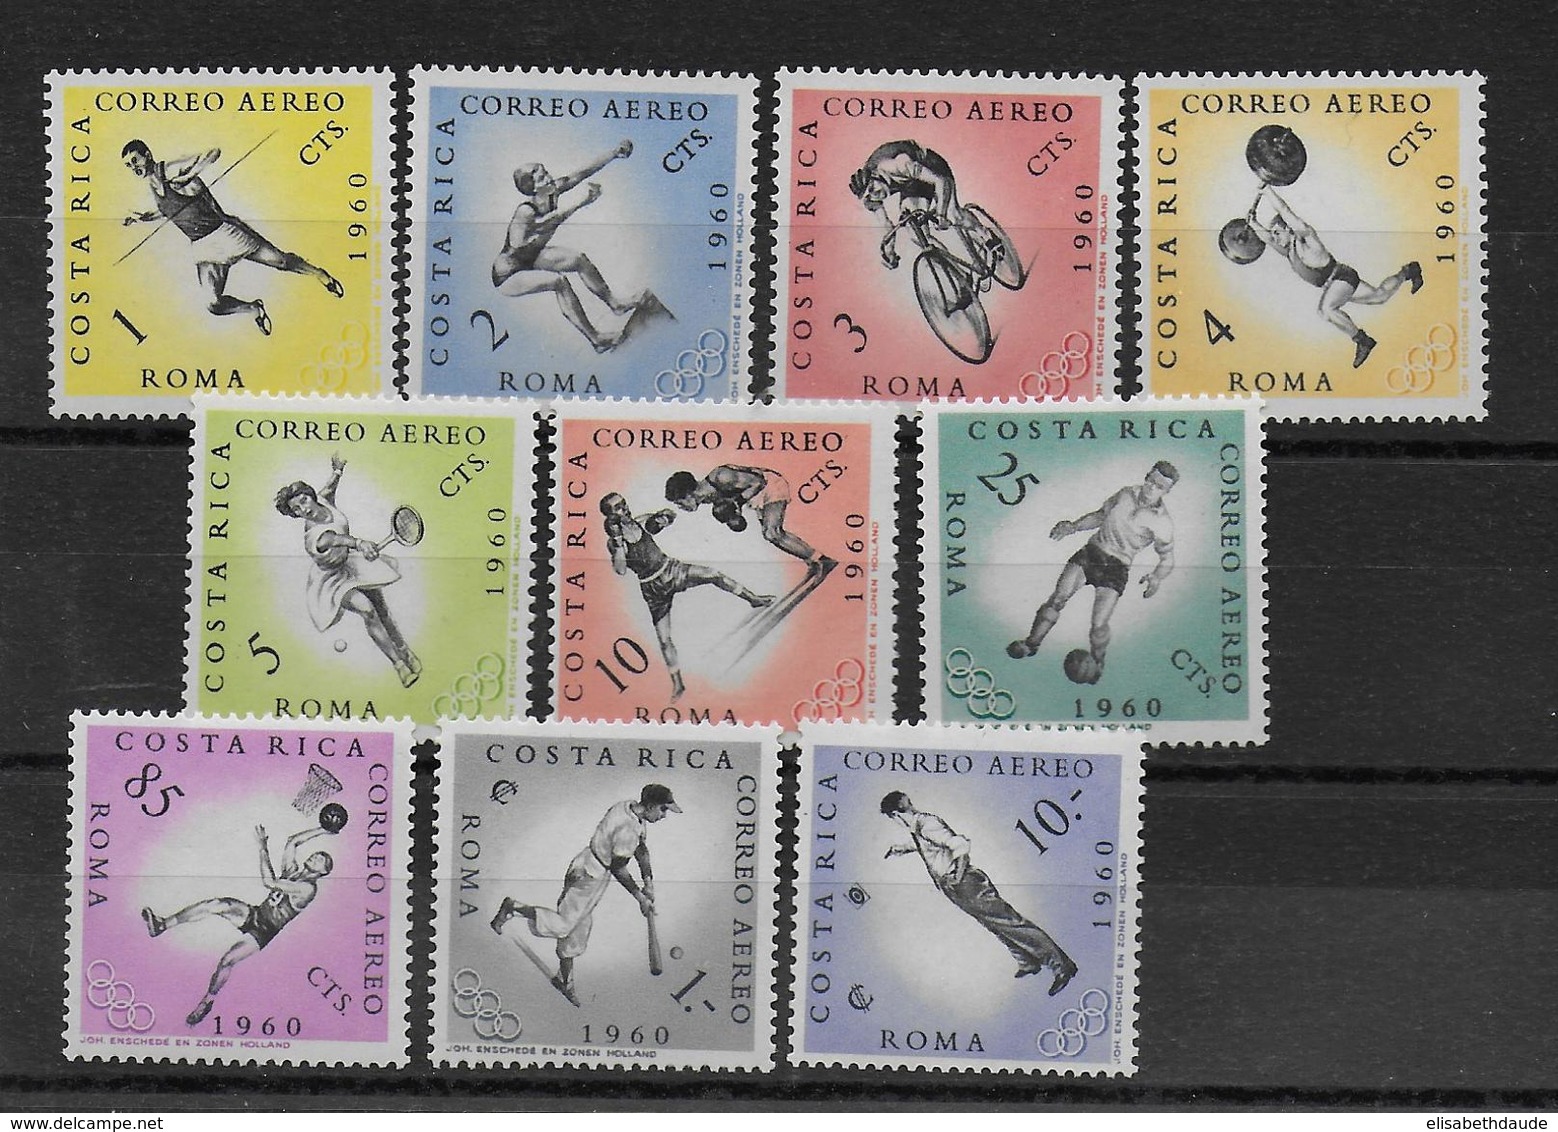 COSTA RICA - JEUX OLYMPIQUES 1960 - POSTE AERIENNE YVERT N°301/310 ** MNH - COTE = 30 EUR. - Costa Rica